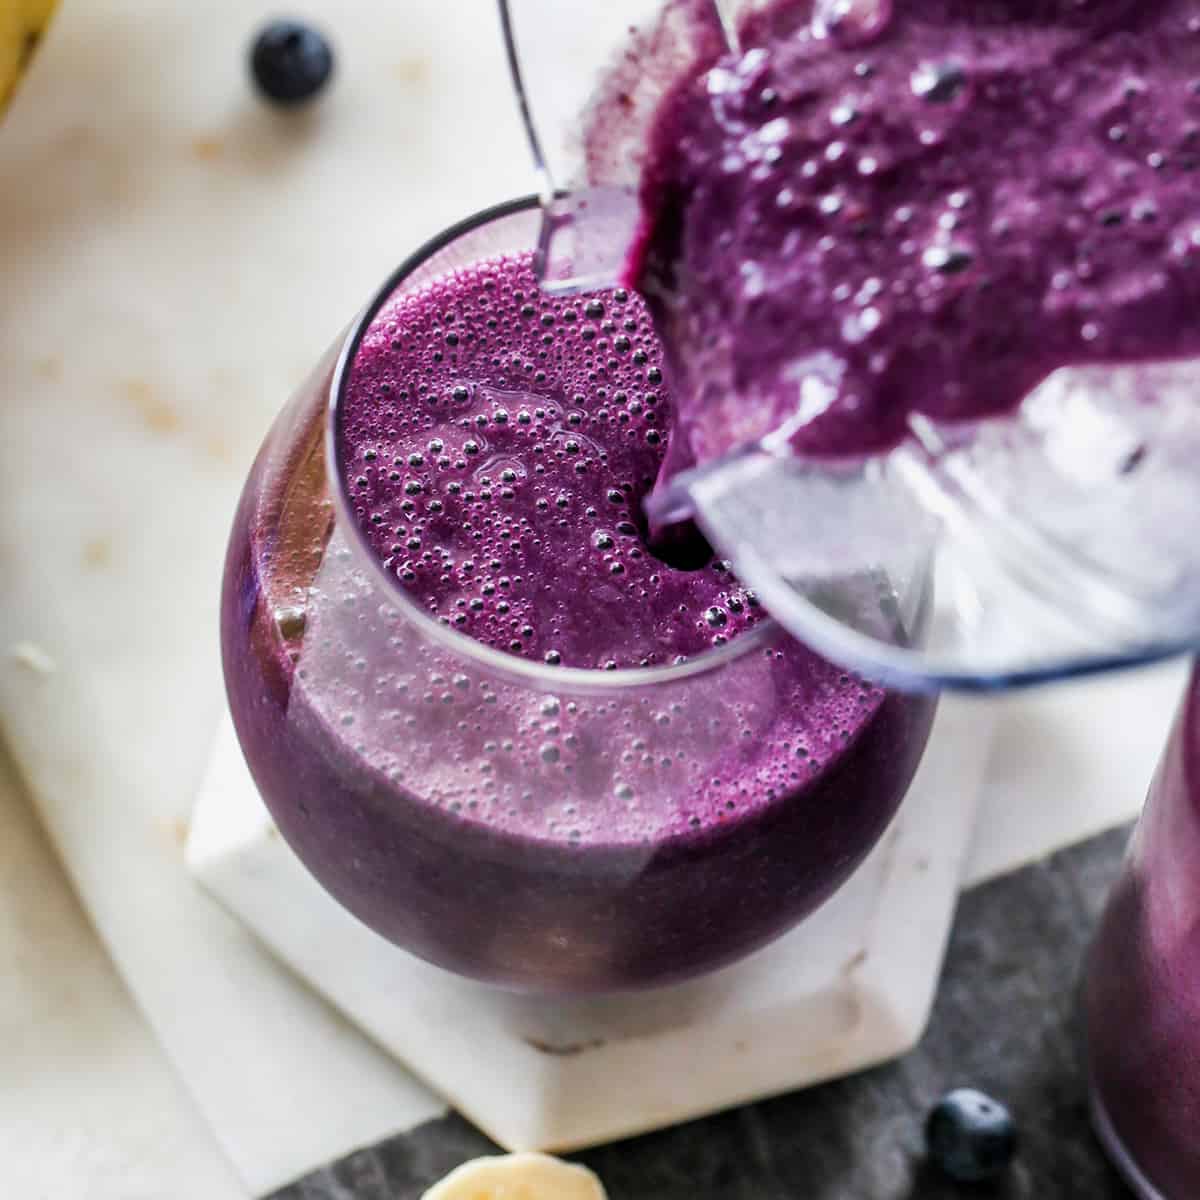 blueberry smoothie being poured from a blending container into a glass